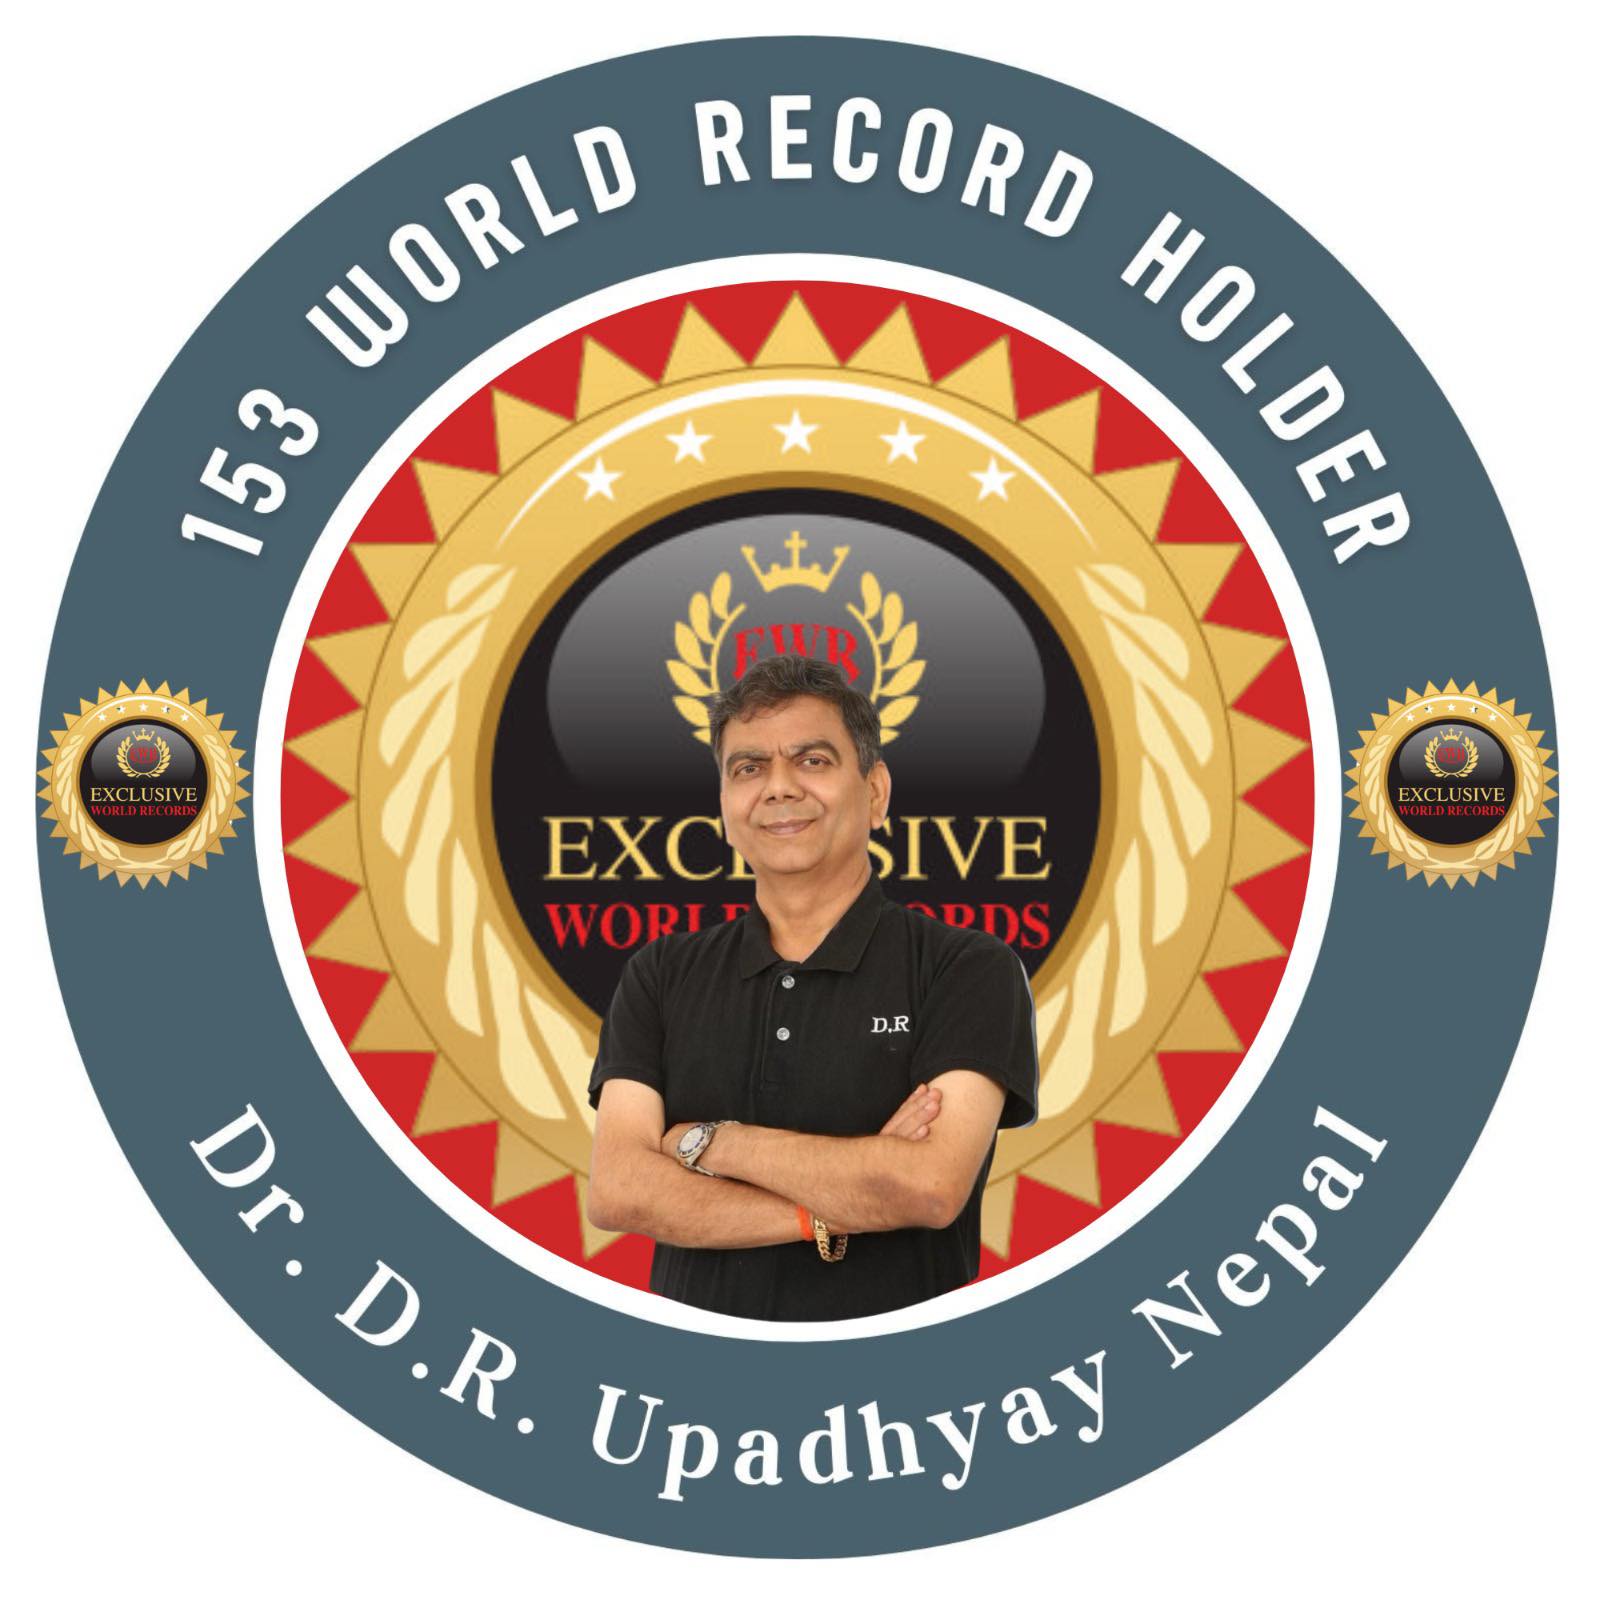 A wonderful Nepali personality Dr. Upadhyay who has 153 world records